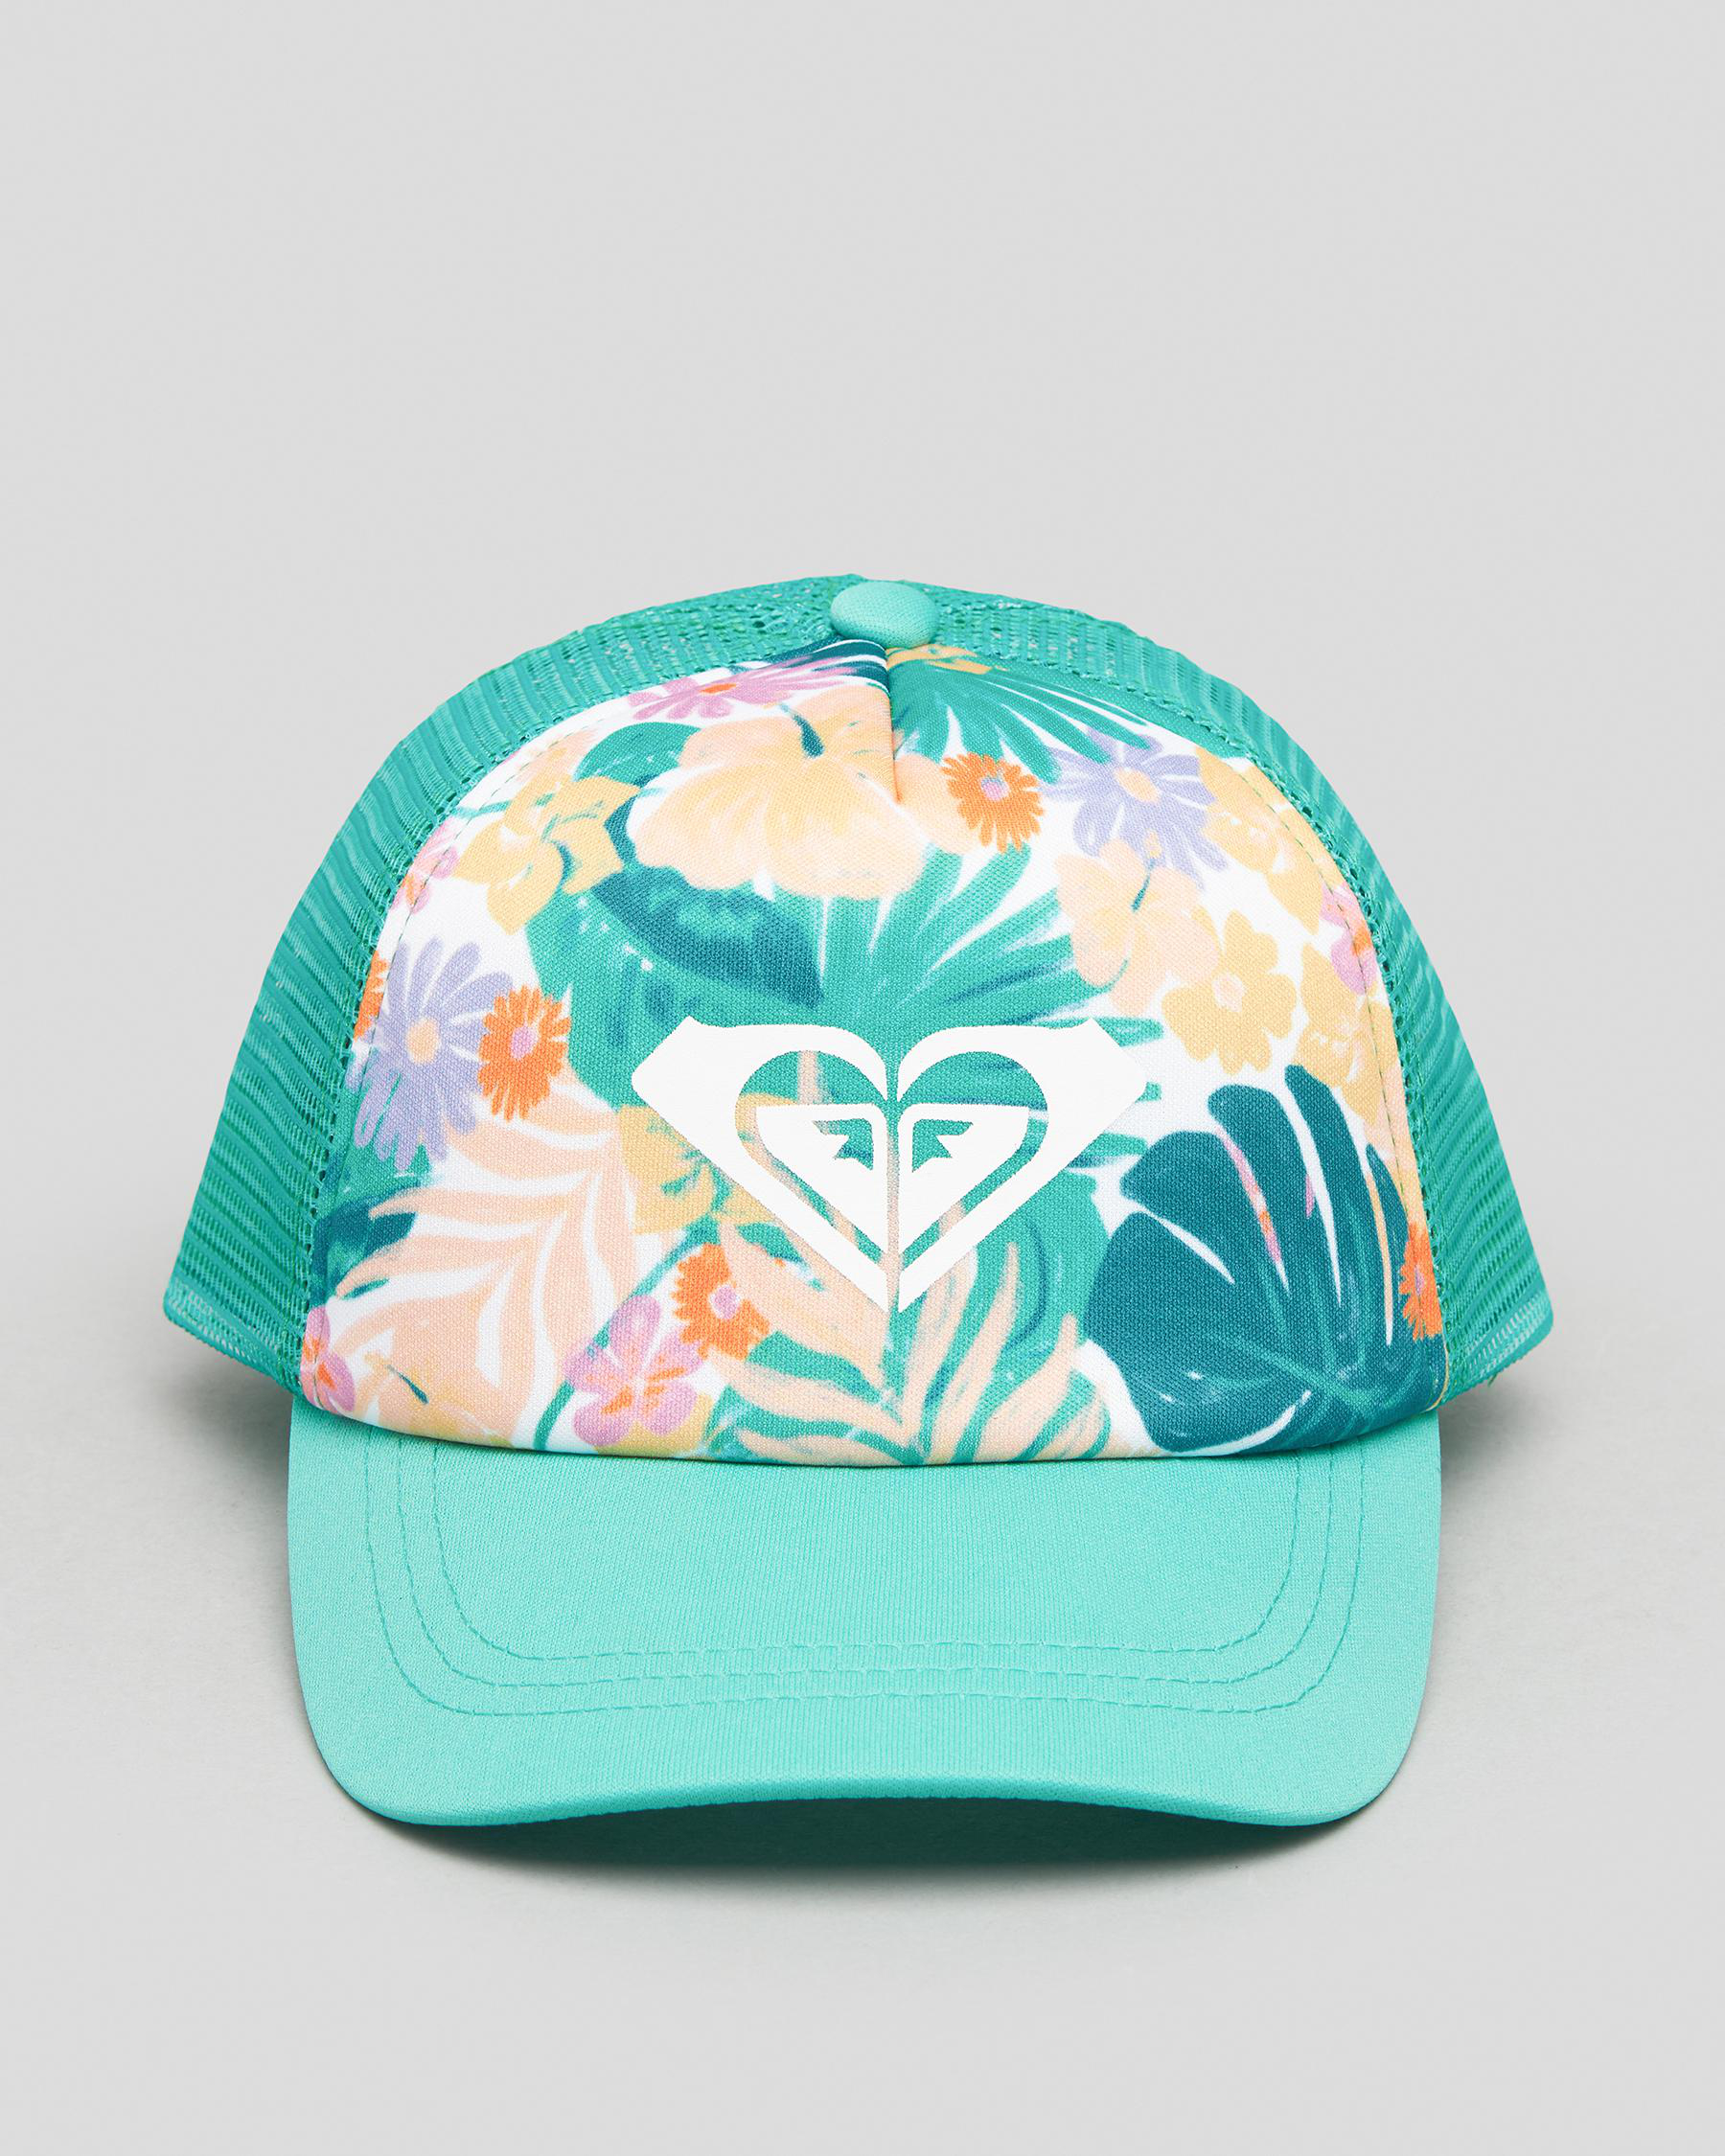 Roxy Toddlers\' Sweet Emotion United Trucker Easy & Cap - City FREE* States Mint Trails Returns - In Shipping Beach Tropical